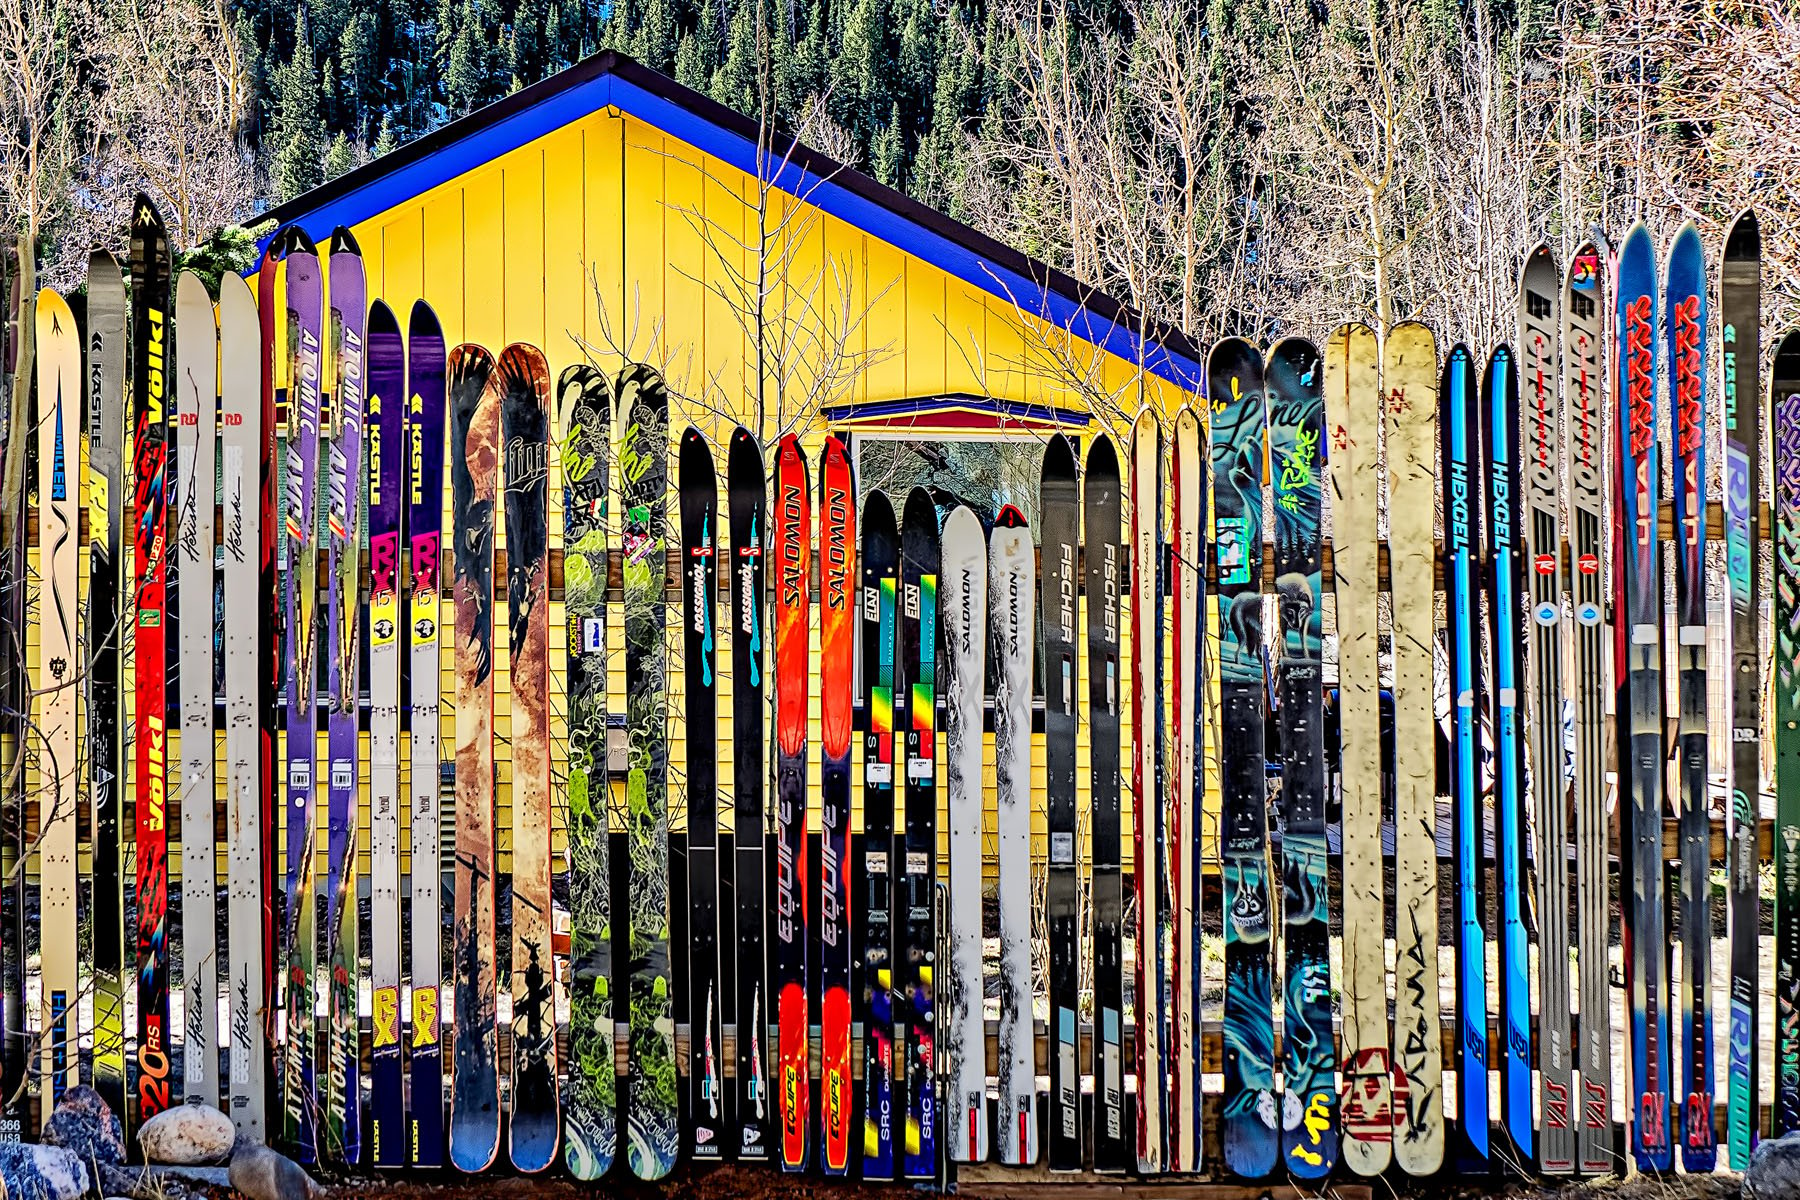 FENCE OF SKIS - You know what they say... “The best offence is a good ski fence.” 